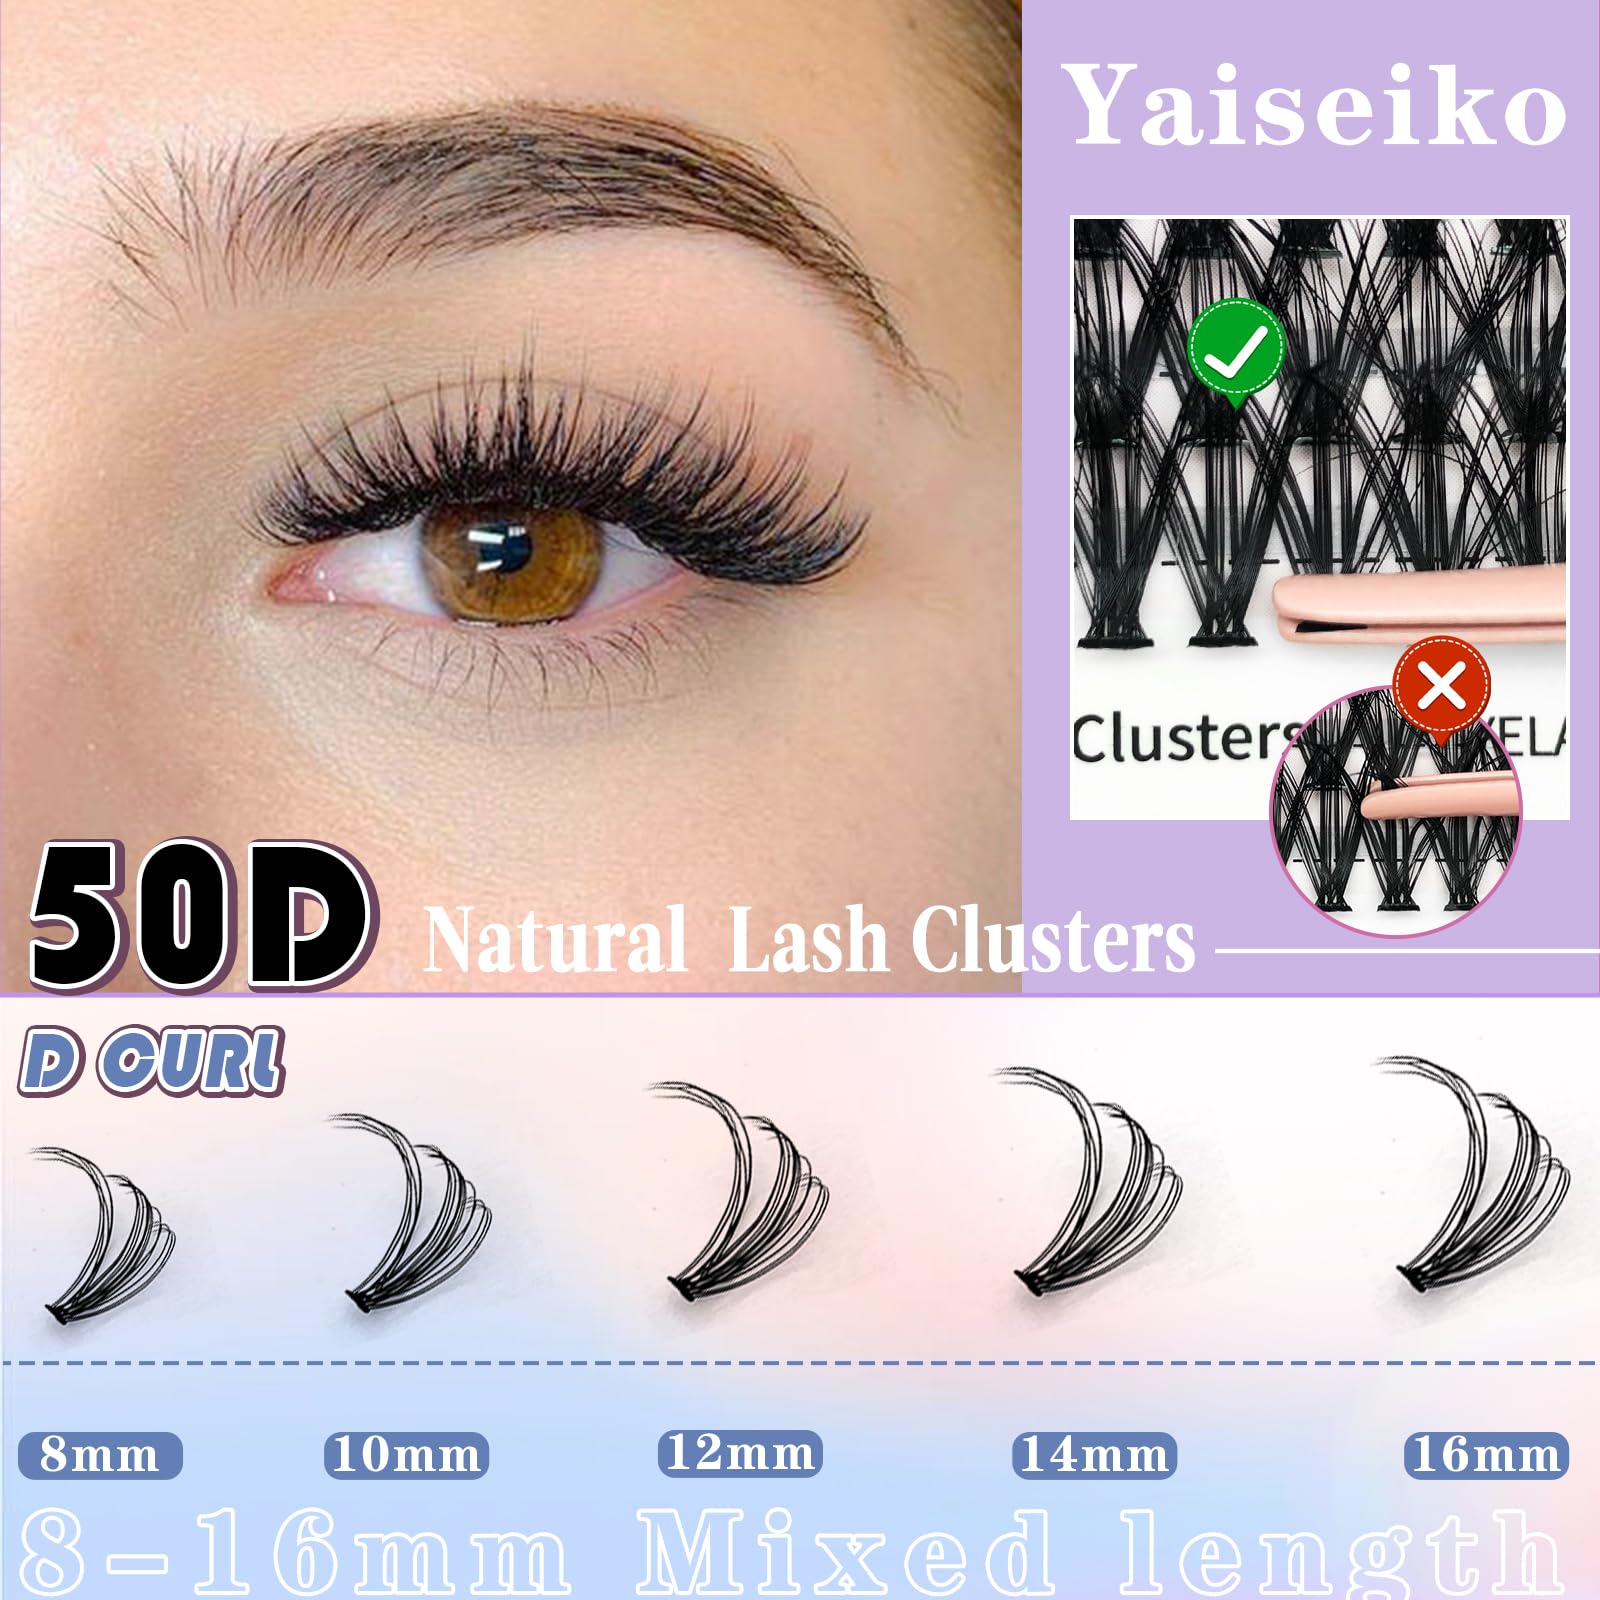 Lash Extension Kit 50D Fluffy Cluster Eyelash Extensions Kit 300 Pcs DIY Individual Lashes Kit with Lash Bond and Seal and Lashes Tweezers 8-16mm Mix D Curl Wispy False Eyelashes Pack, by Yaiseiko